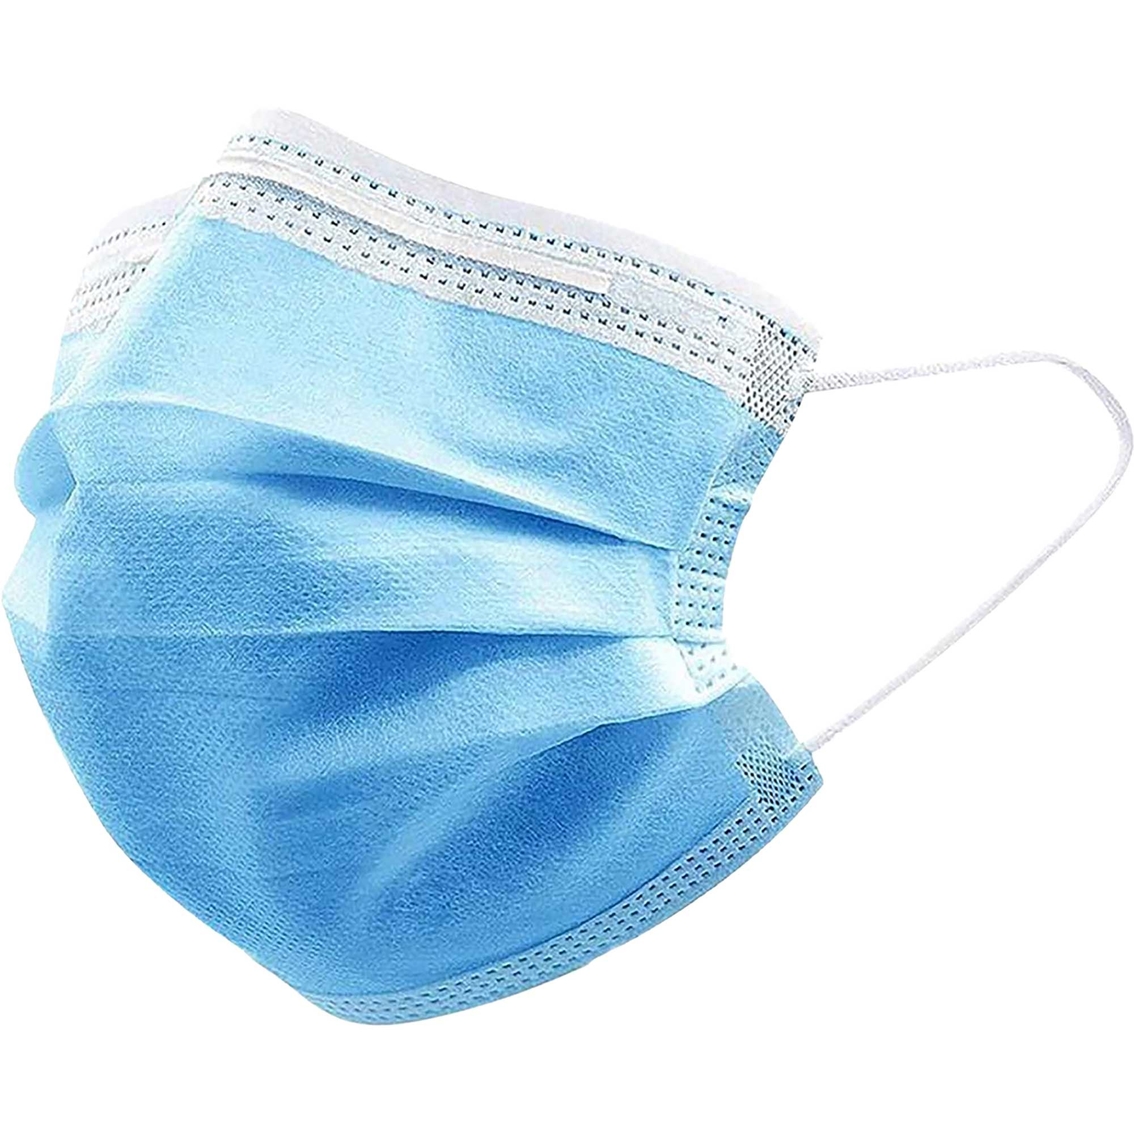 6BLU 3 Ply Disposable Face Mask 50 ct. - Image 2 of 3